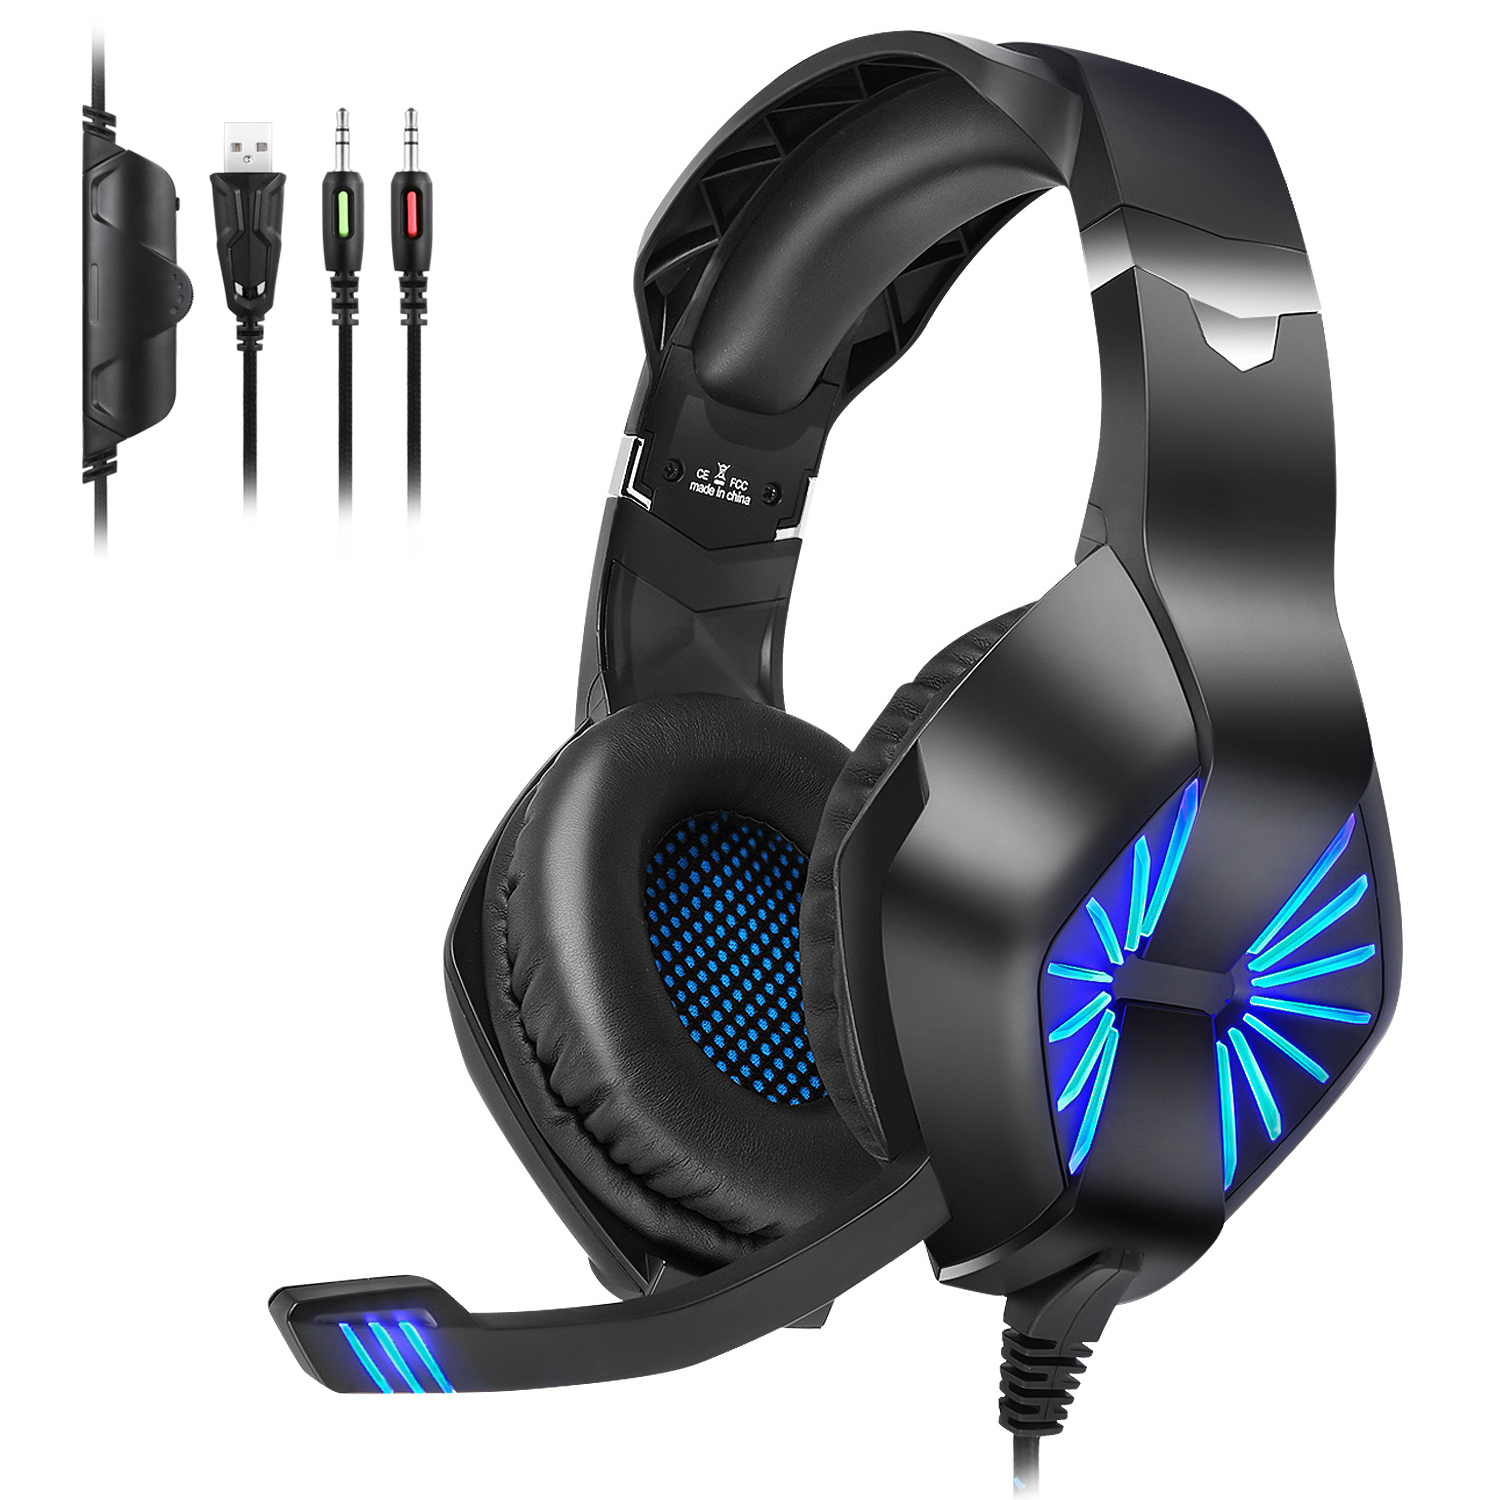 2022 New Design Latest Virtual 7.1 Gaming Headset with Mic for PC Playstation4 Console Made in China CE Earphones & Headphones Cool LED Display Headphone